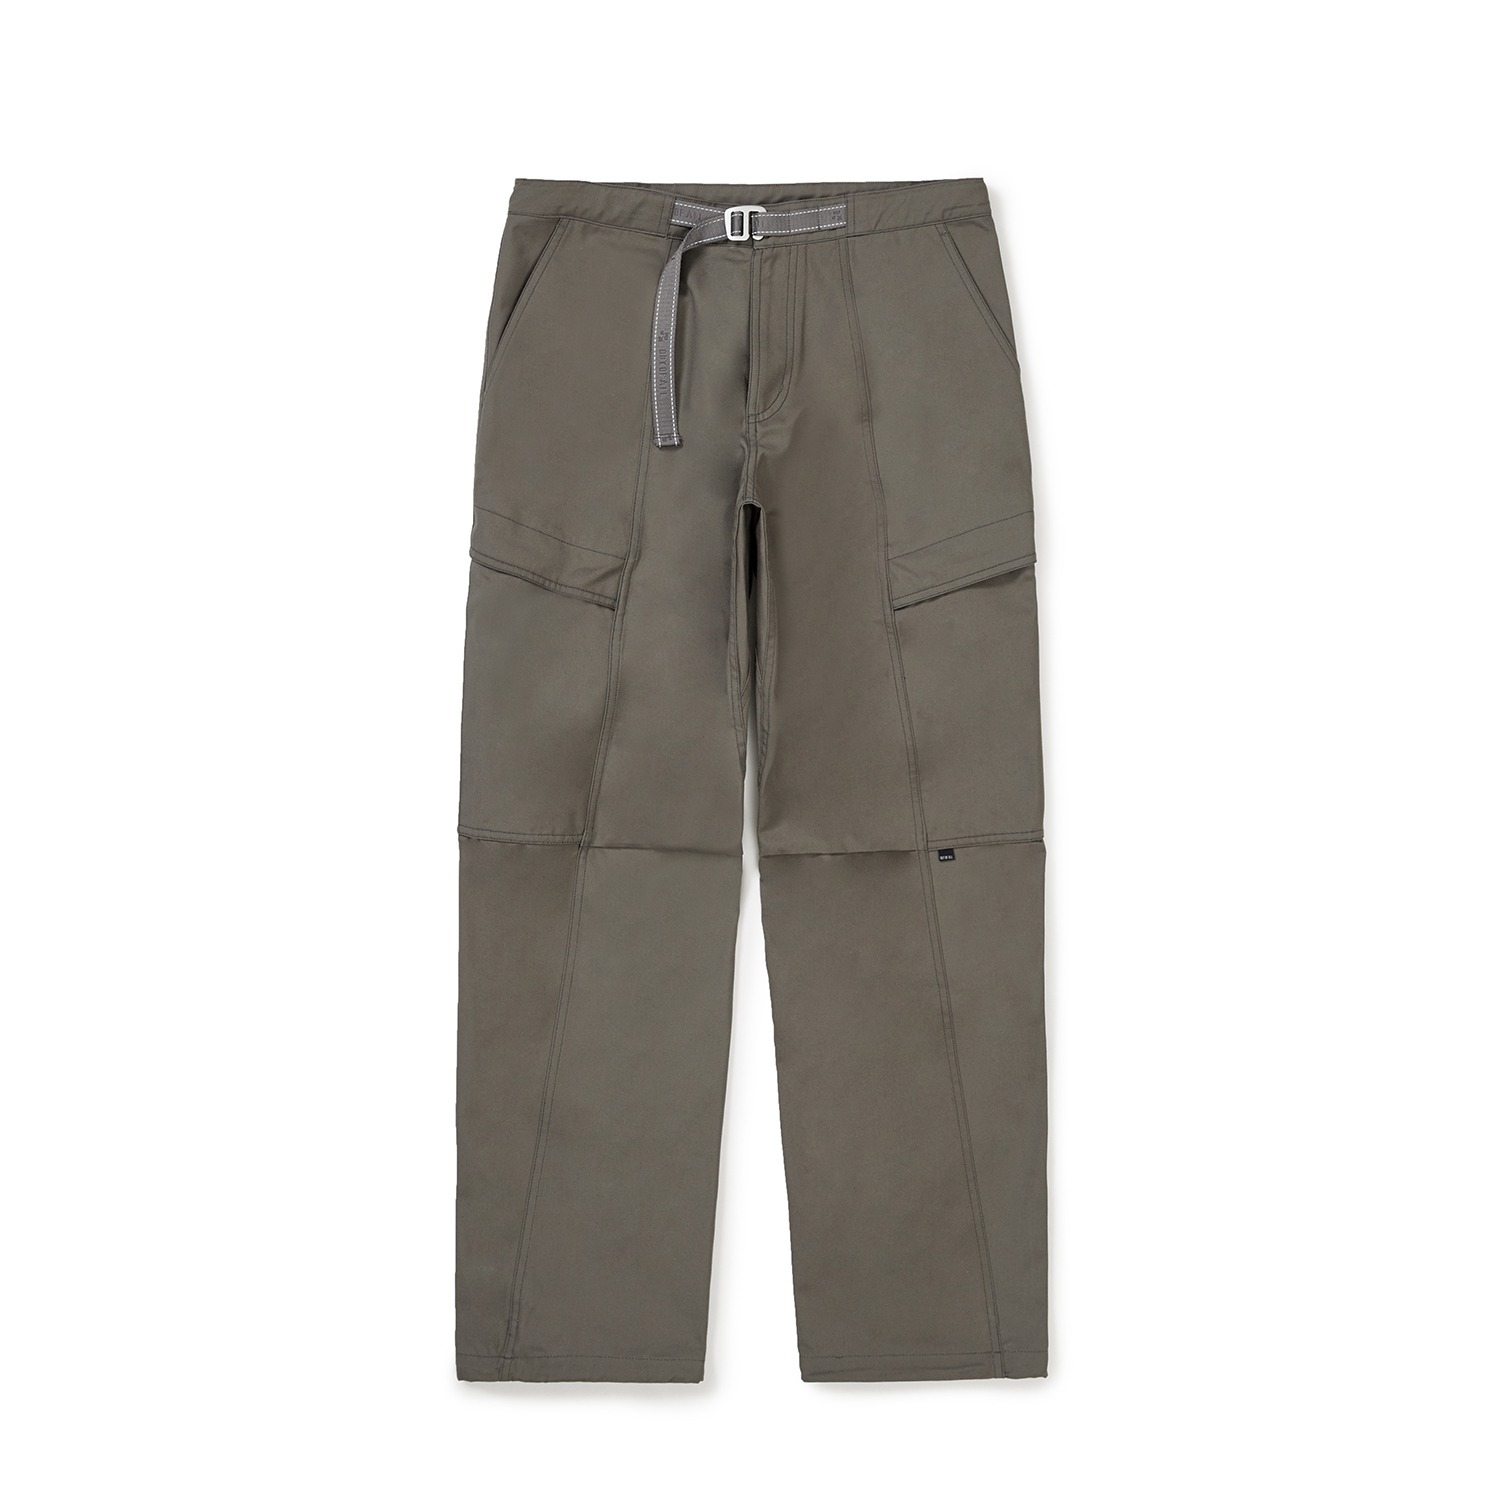 OUT OF ALL VENTILE CARGO PANTS-SMOKED PEARL[아웃오브올 벤타일 카고 팬츠-스모크드 펄]